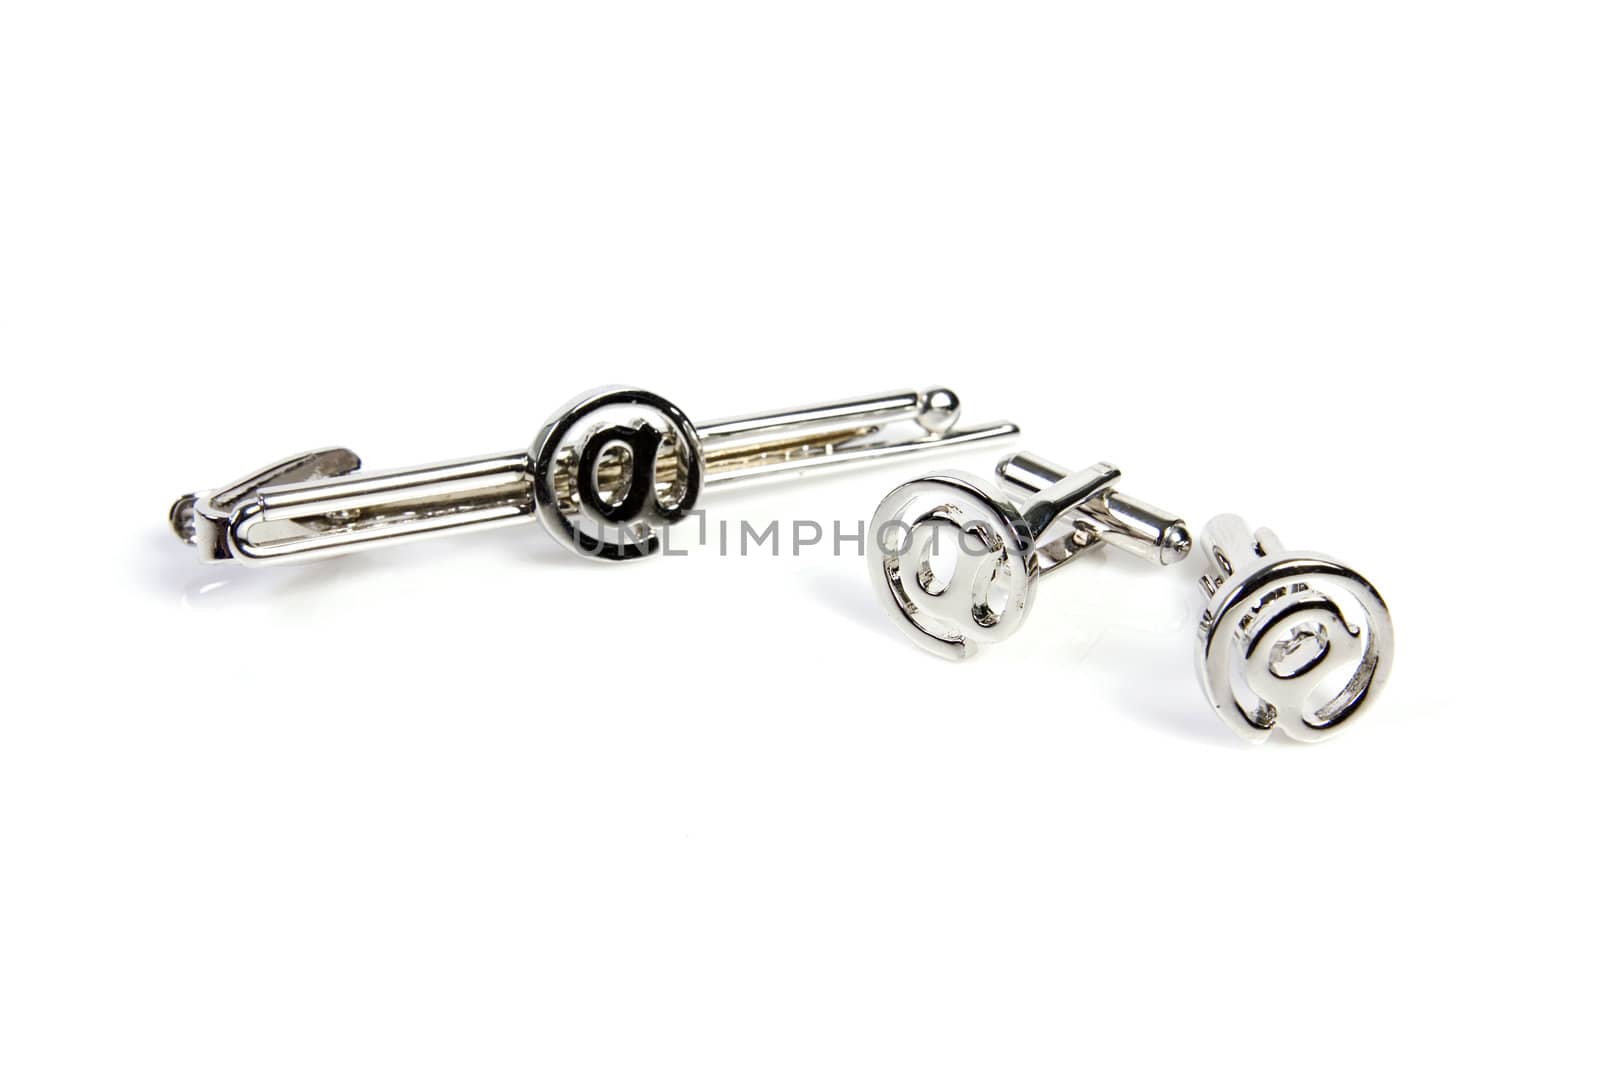 Tie clip and cufflinks formalwear accessory on white background